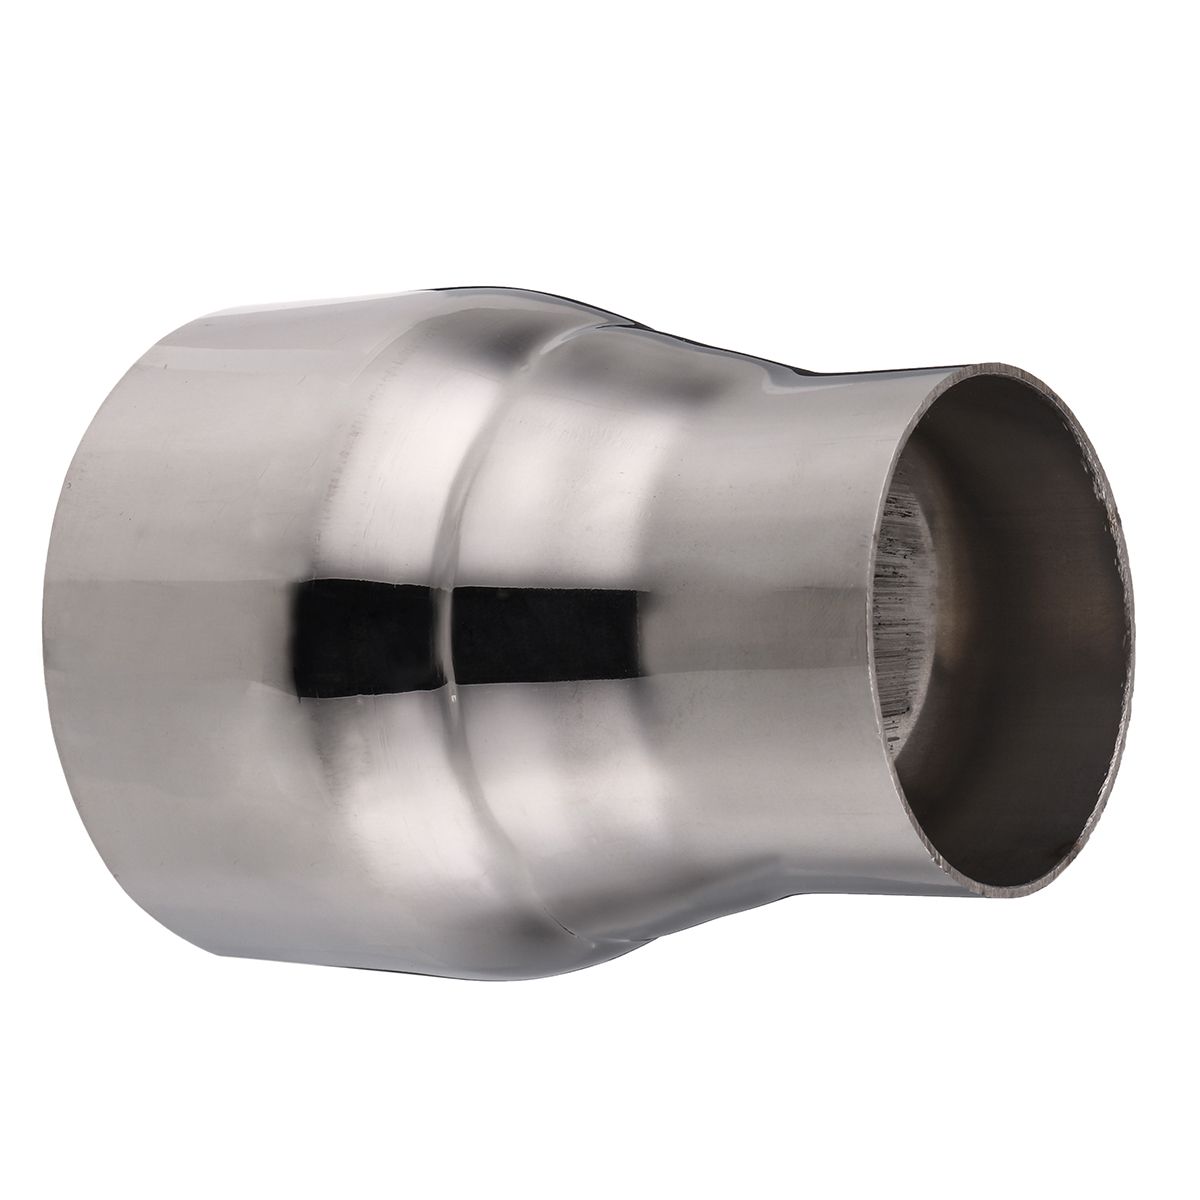 3-Inch-ID-To-2-Inch-OD-Stainless-Steel-Turbo-Exhaust-Pipe-Connector-Adapter-Reducer-Tube-1261665